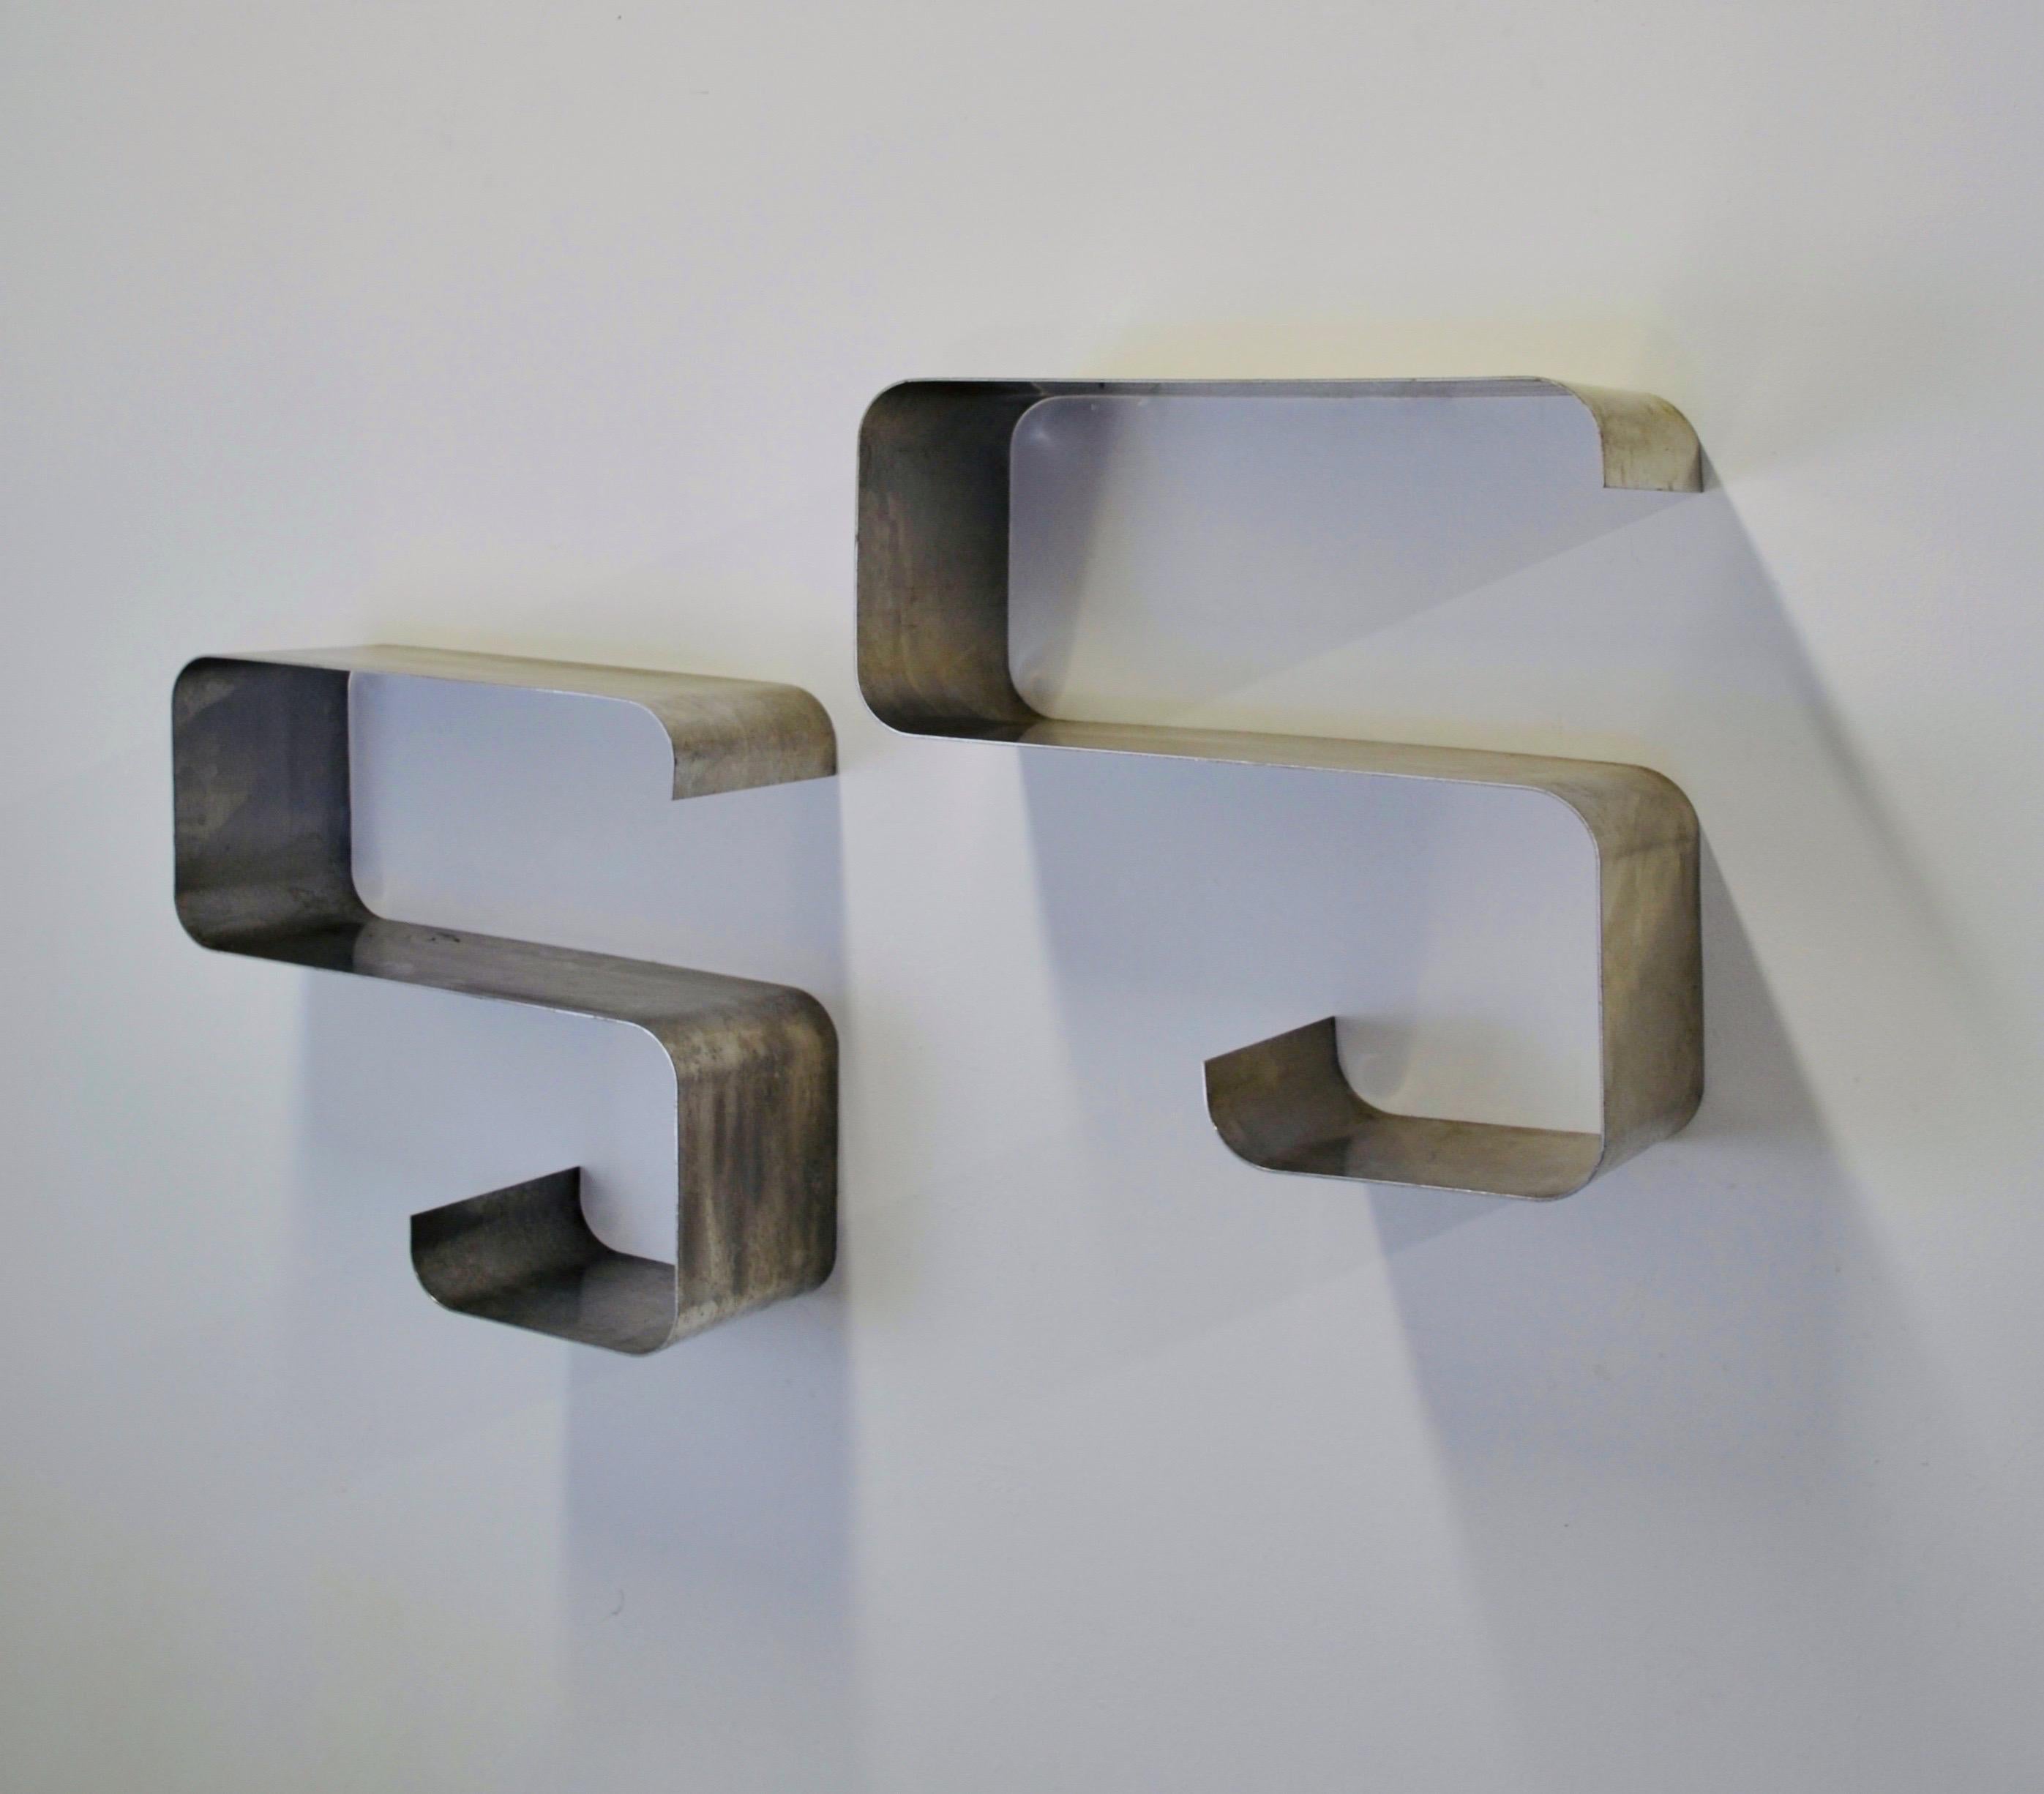 Stainless Steel A pair of S-shaped stainless steel shelves 